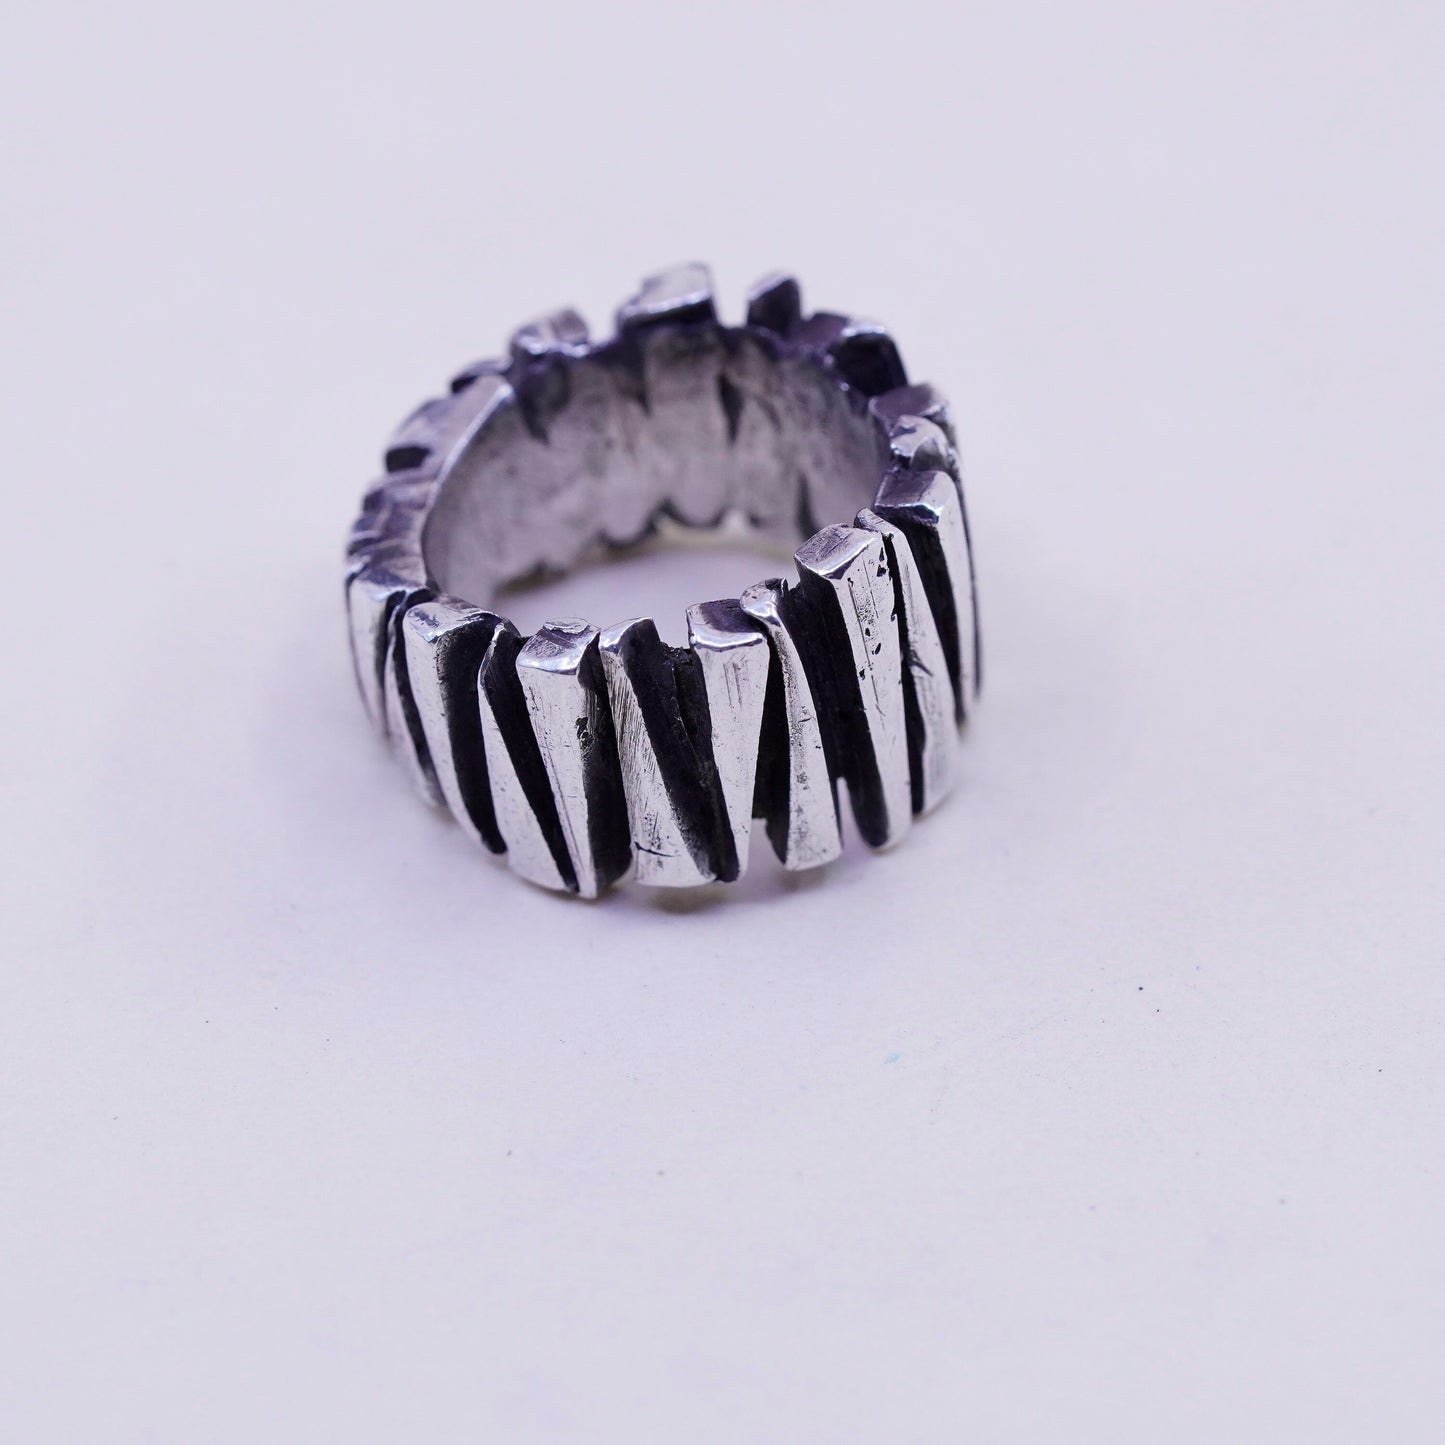 Size 6.25, Vintage sterling silver handmade ring, 925 statement ring w/ ribbed